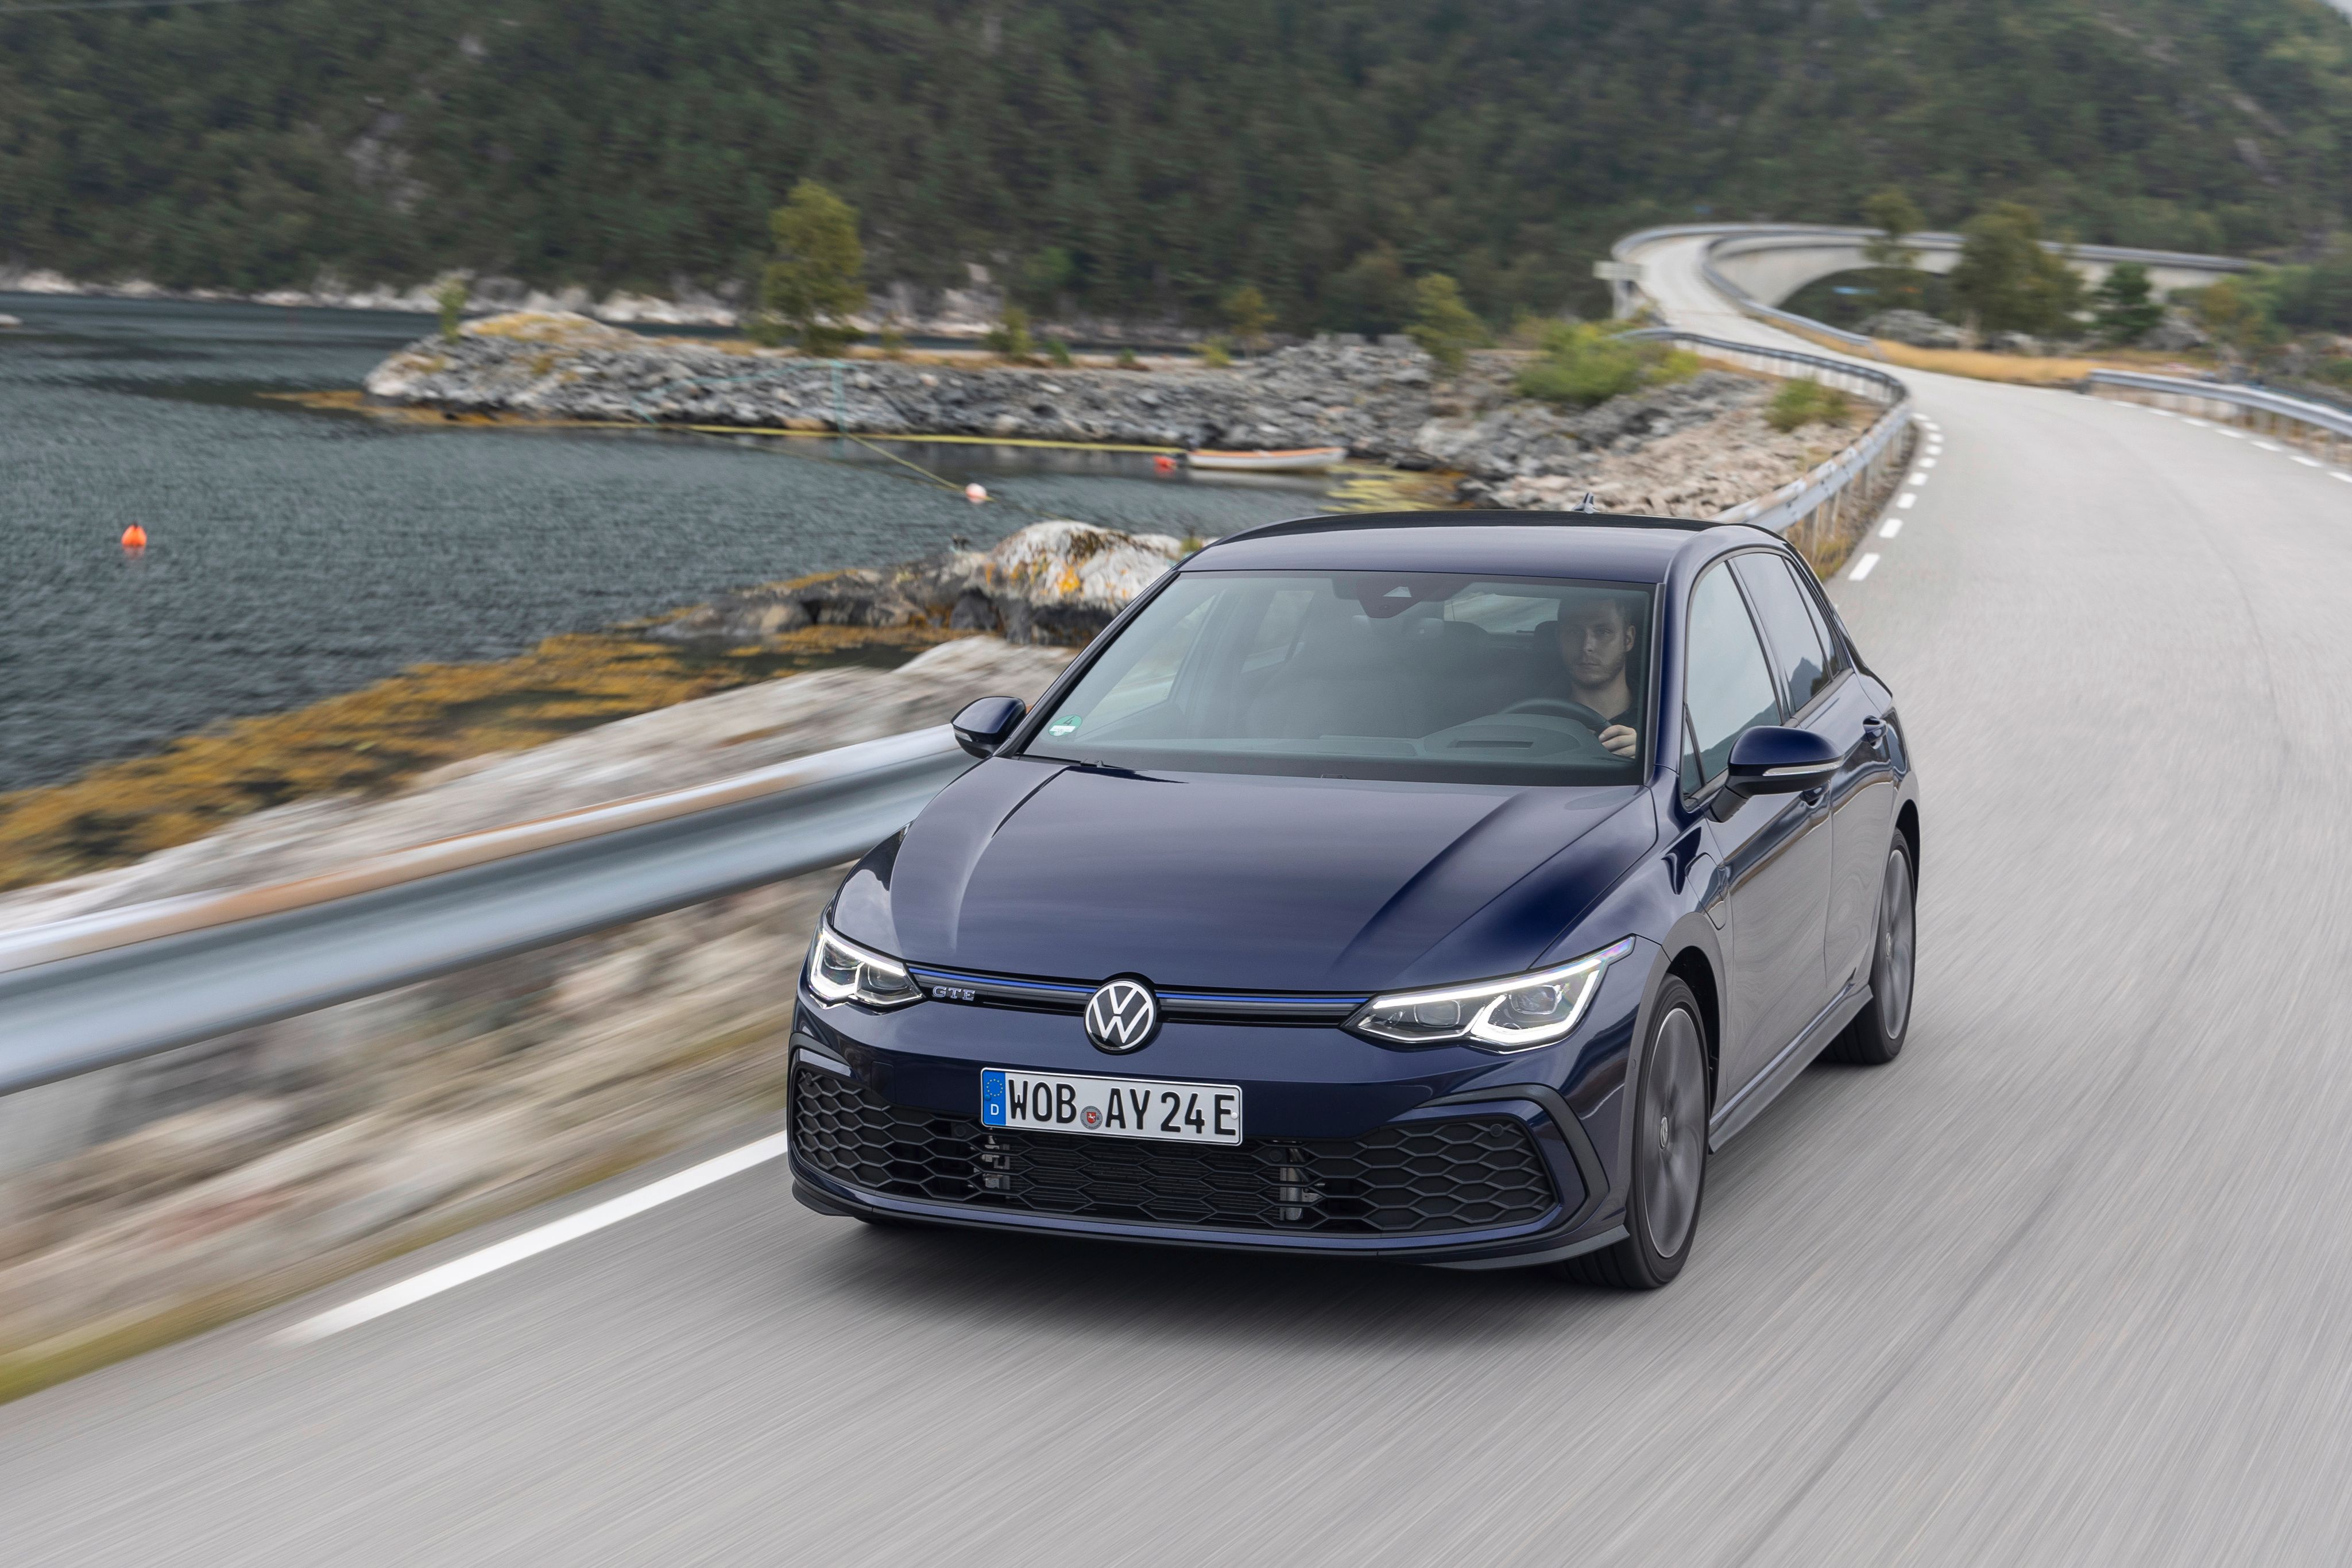 New 2020 Volkswagen Golf GTE: price, specifications and on-sale date